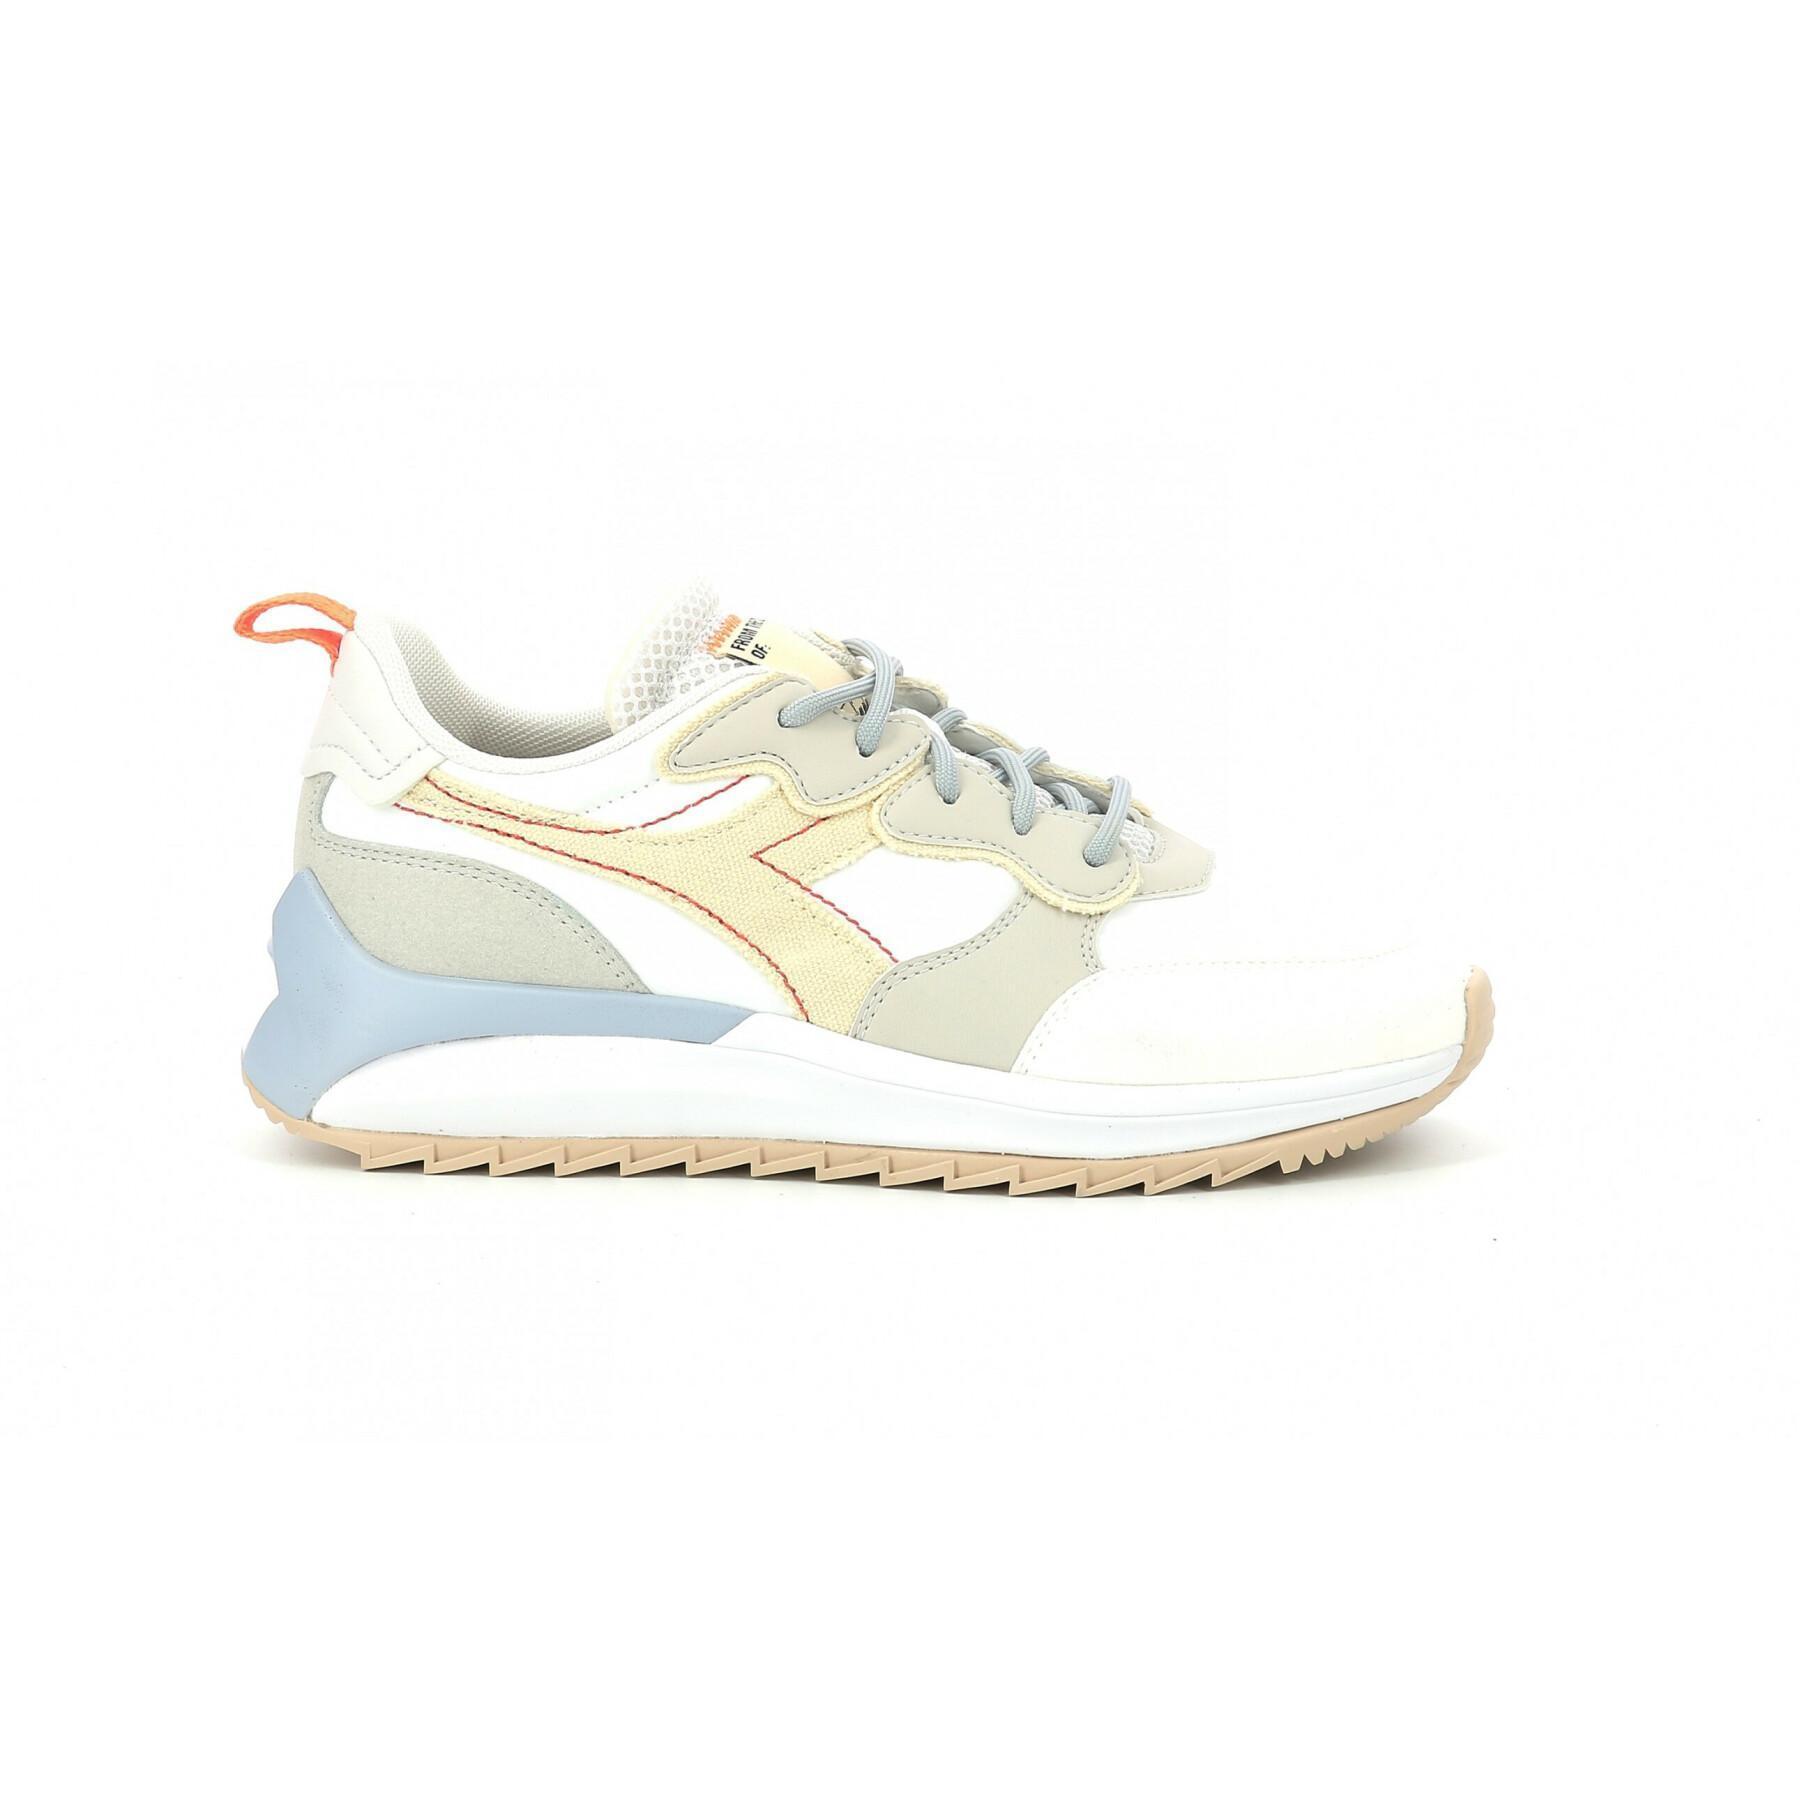 Women's sneakers Jolly Canvas Wn - Diadora Other brands - Shoes